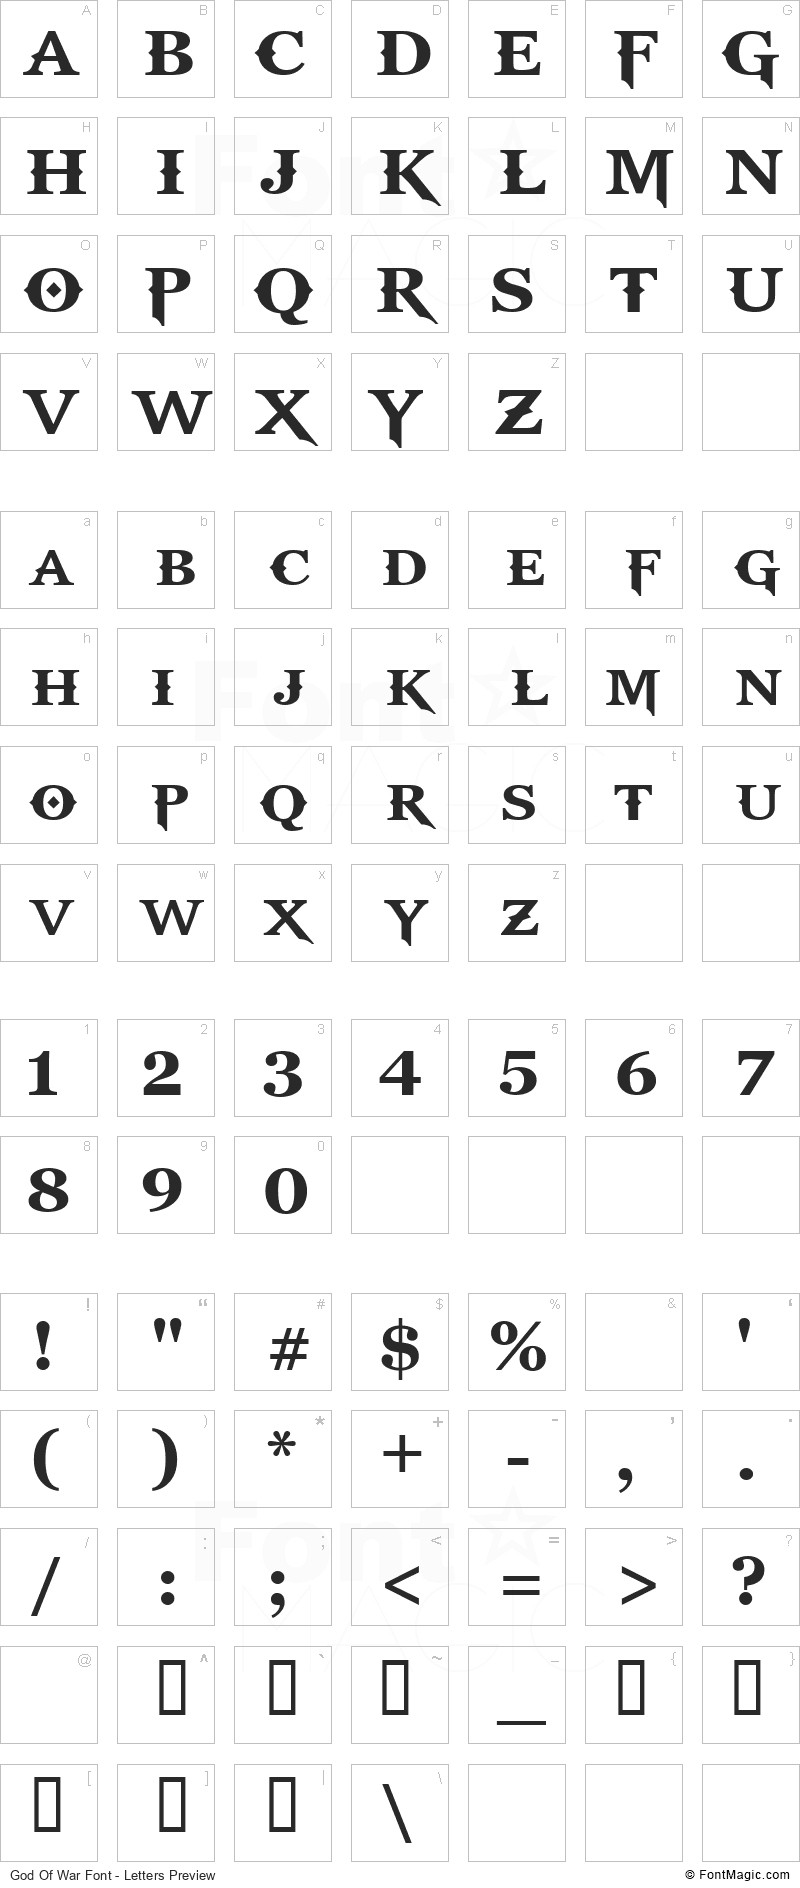 God Of War Font - All Latters Preview Chart